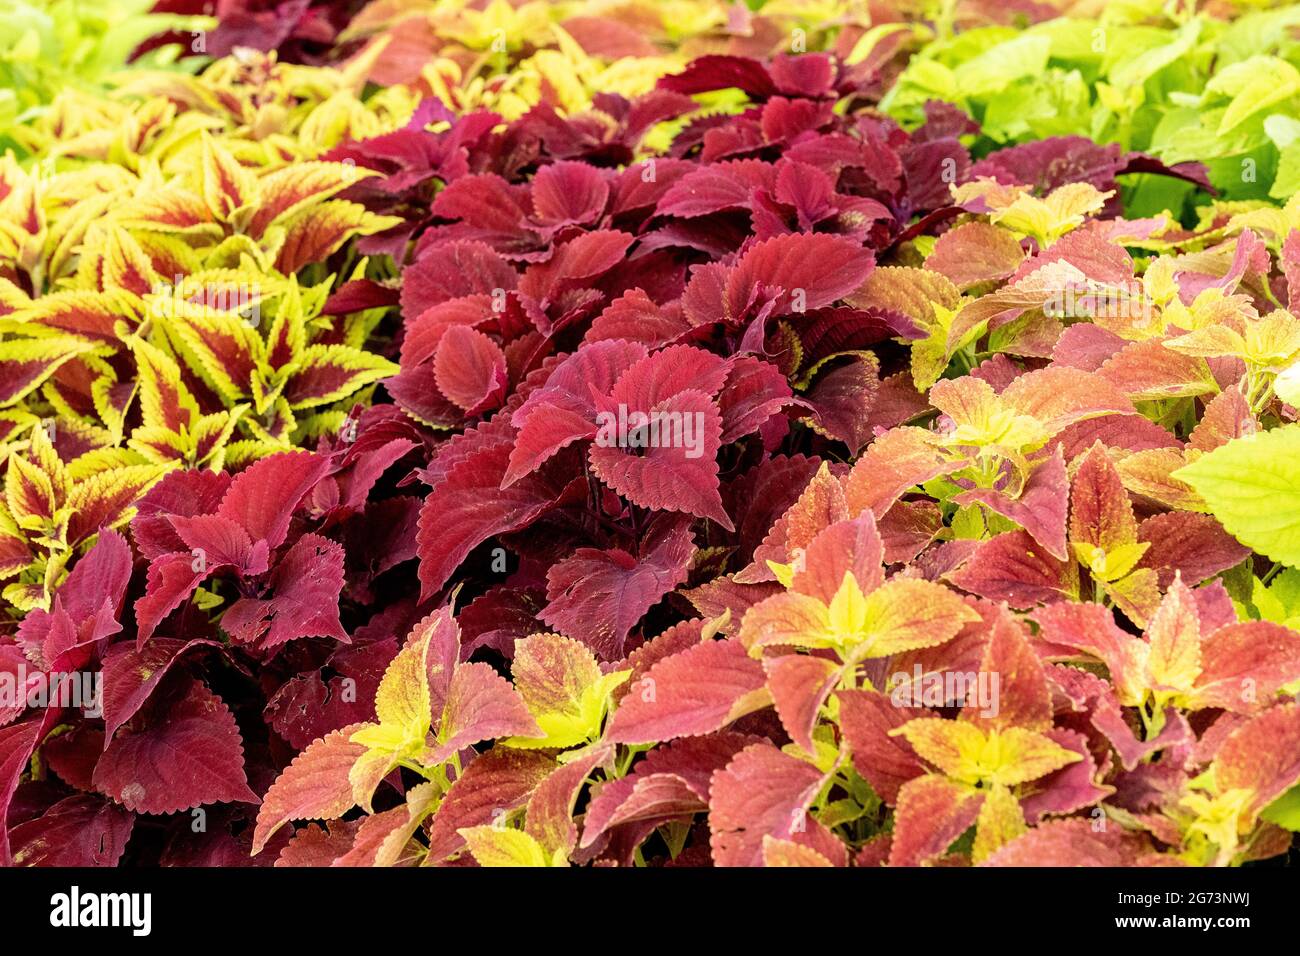 Background of green and pink Caladium plants in a garden in Naples, Florida. Stock Photo